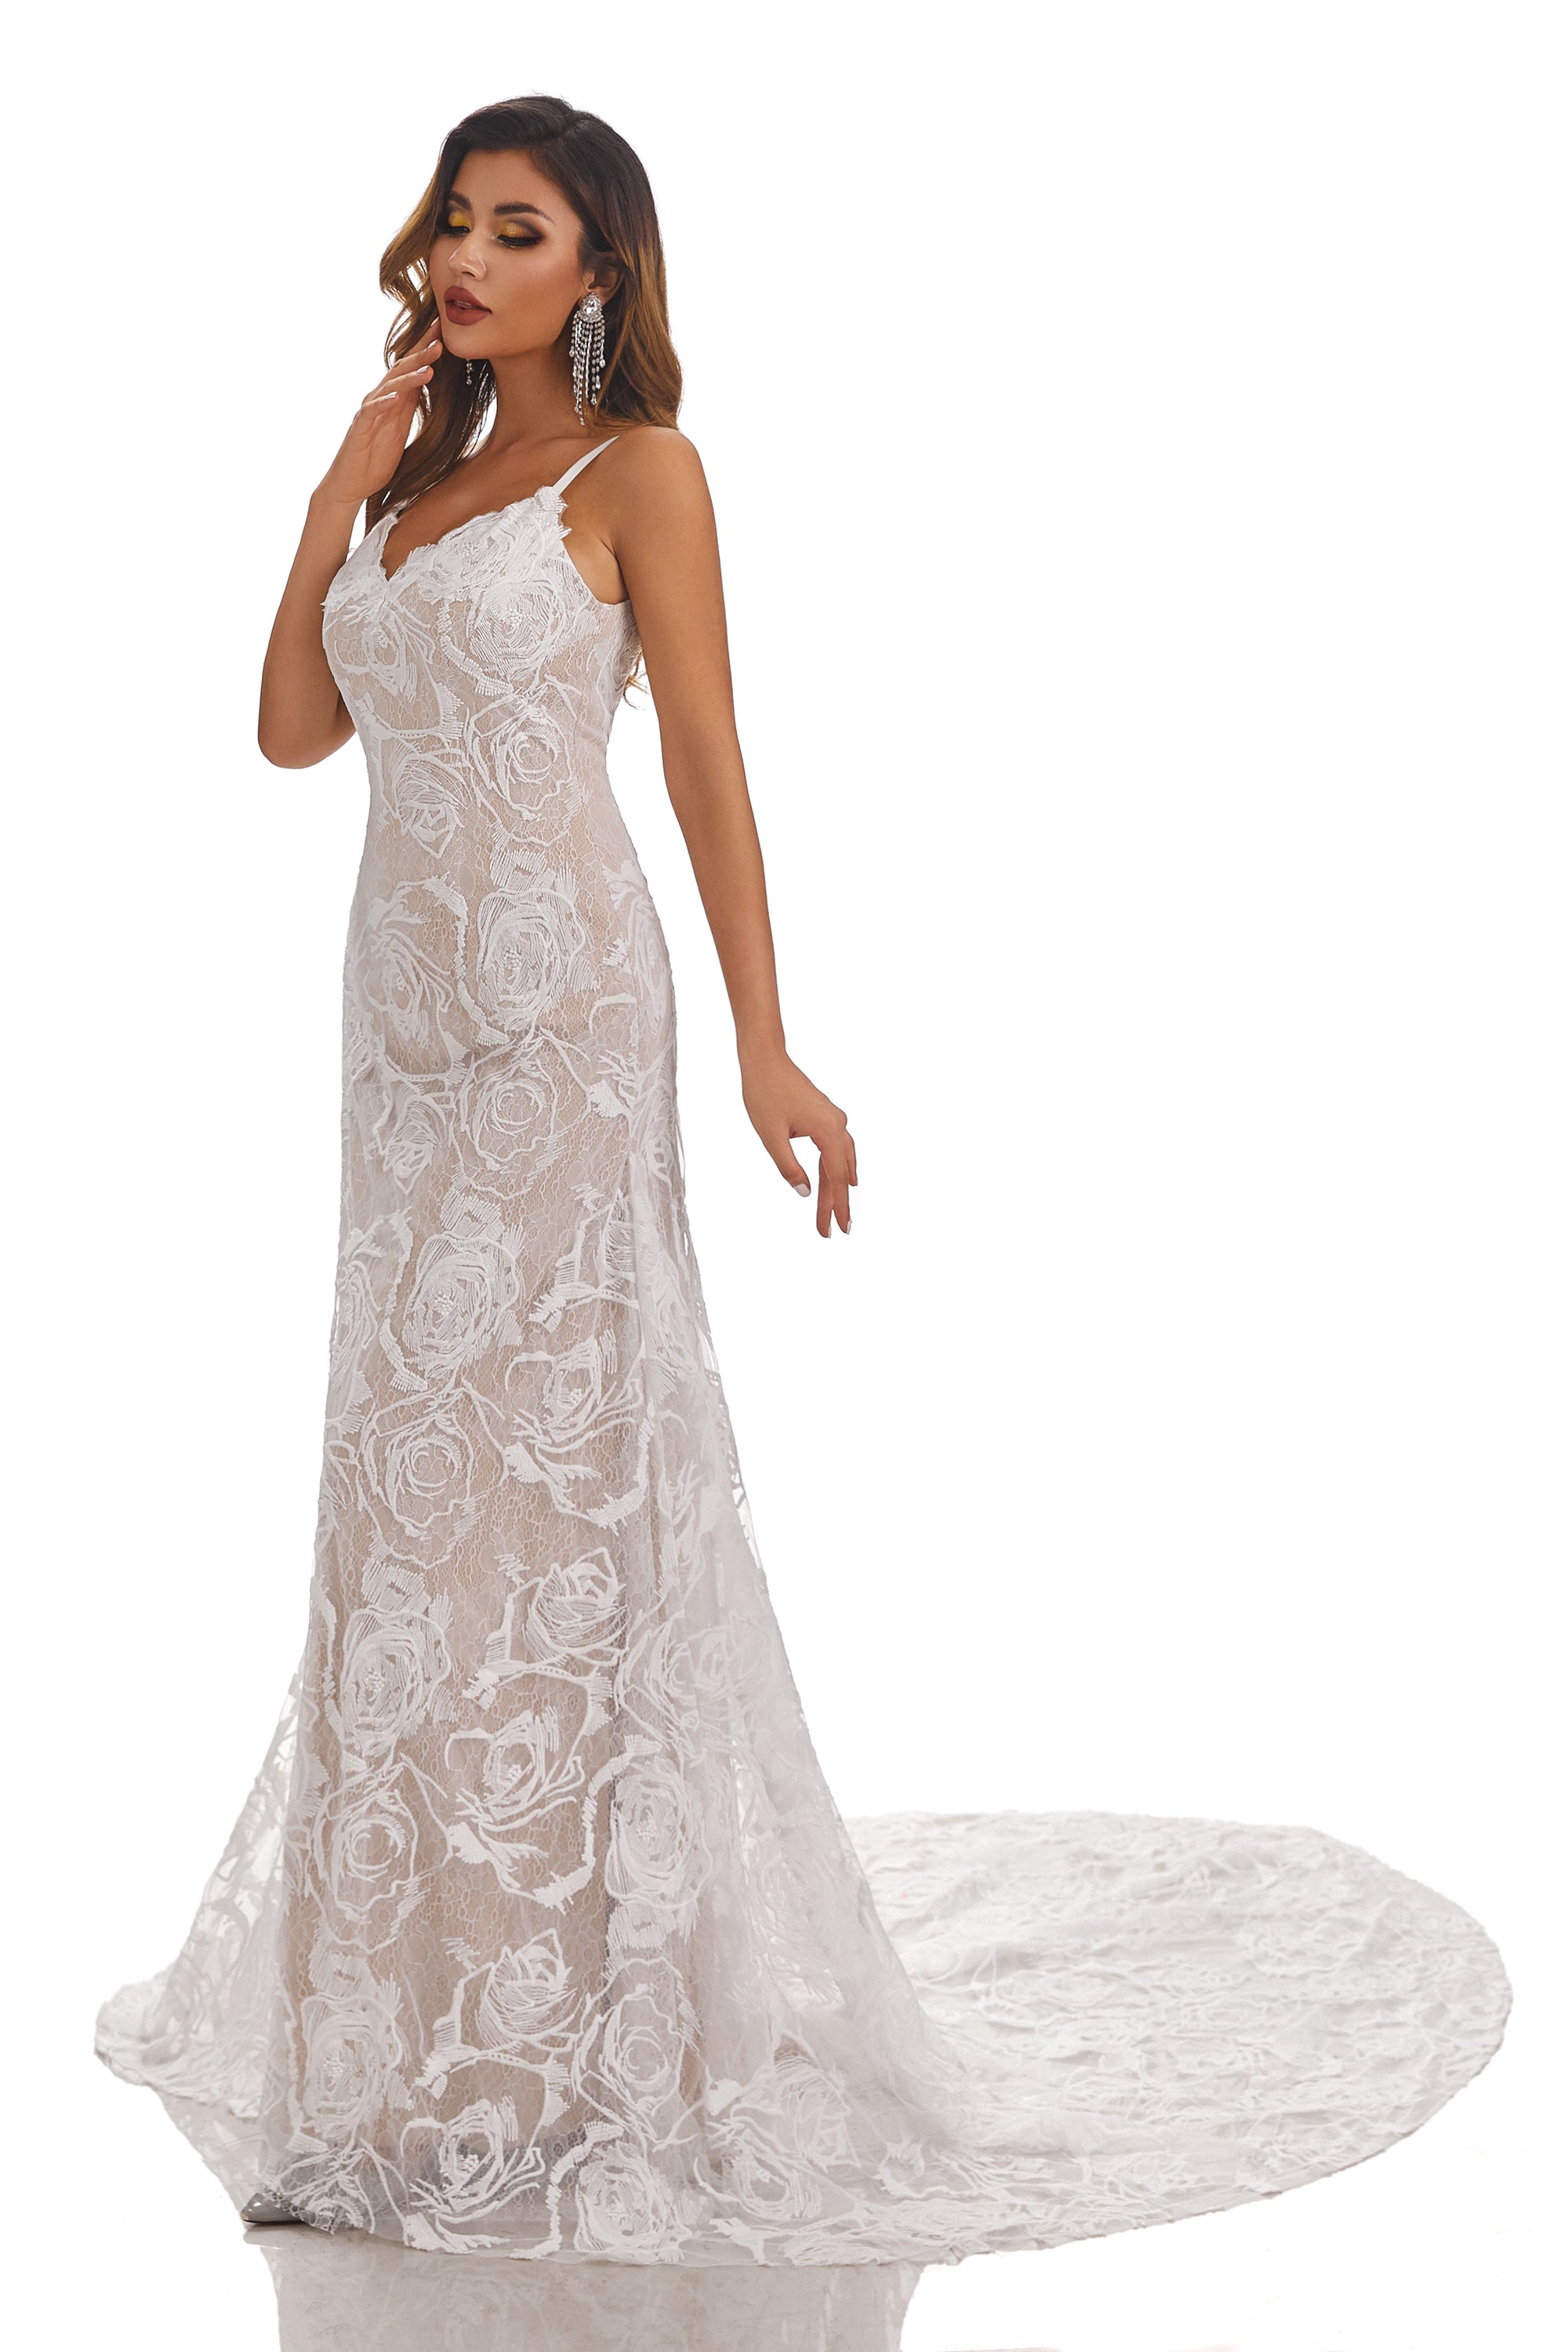 Long Mermaid V-Neck Spaghetti-Straps Wedding Dress With Lace Appliques